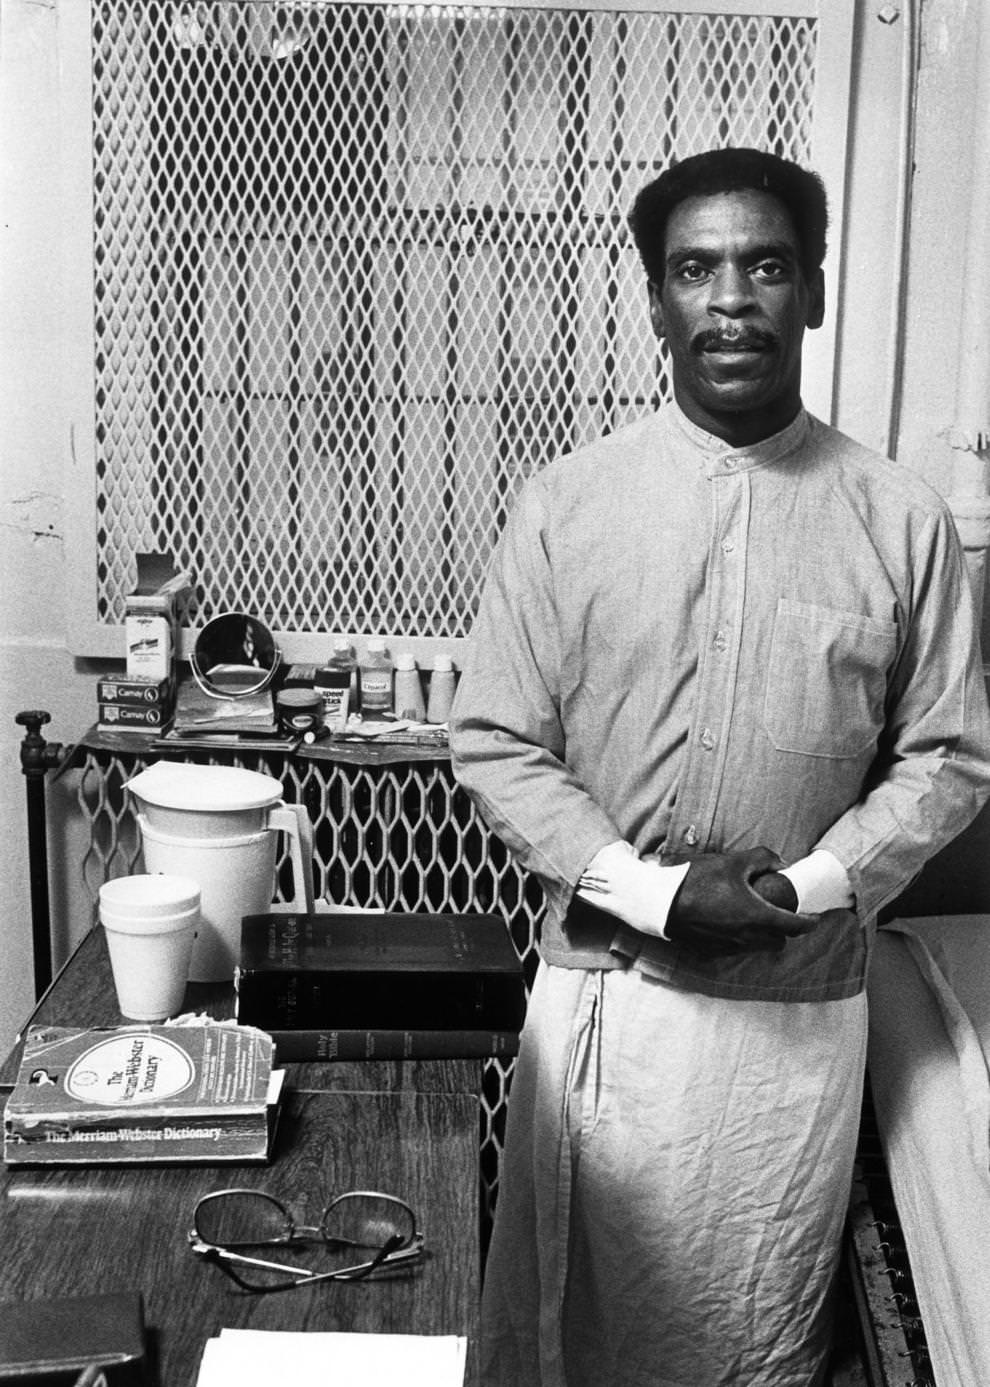 Robert Williams stood in his cell at the State Penitentiary, then located on Spring Street in downtown Richmond, 1985